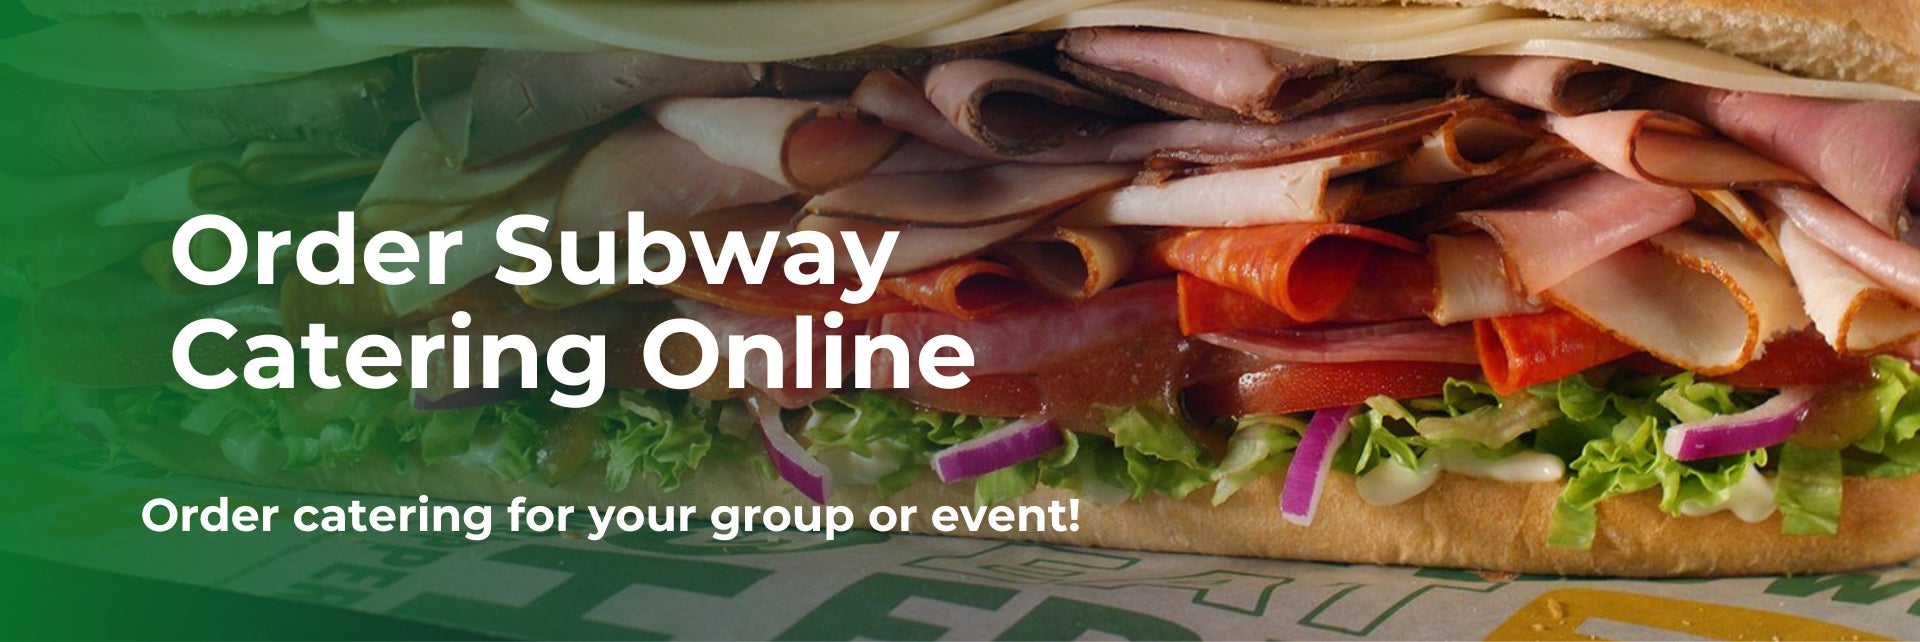 Order Subway Catering Online, Order catering for your group or event